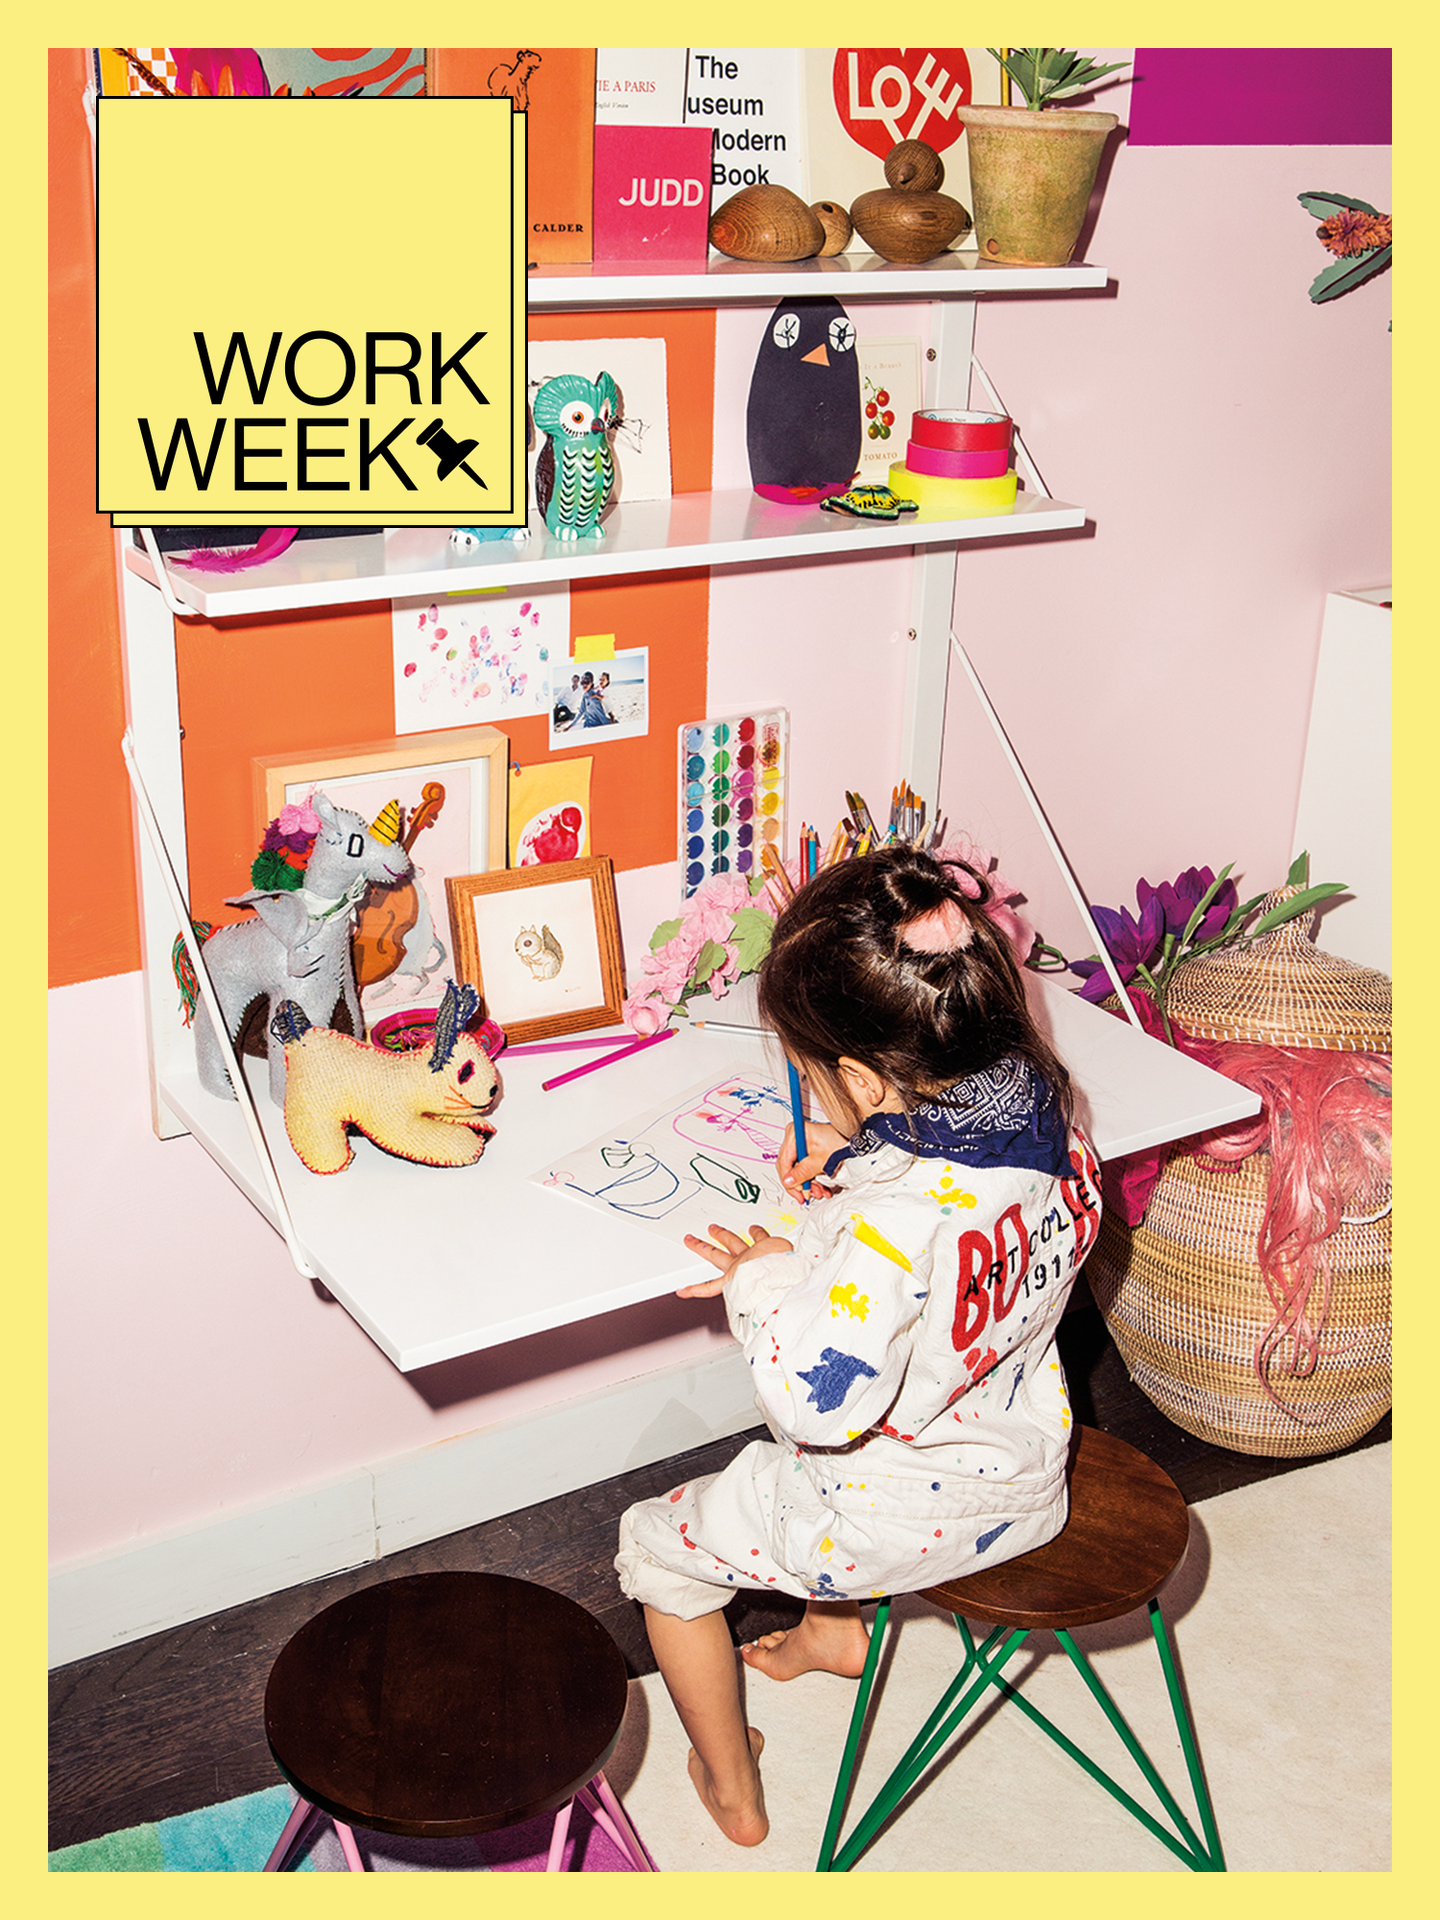 Kid coloring at wall-mounted desk with yellow Work Week border and design badge.